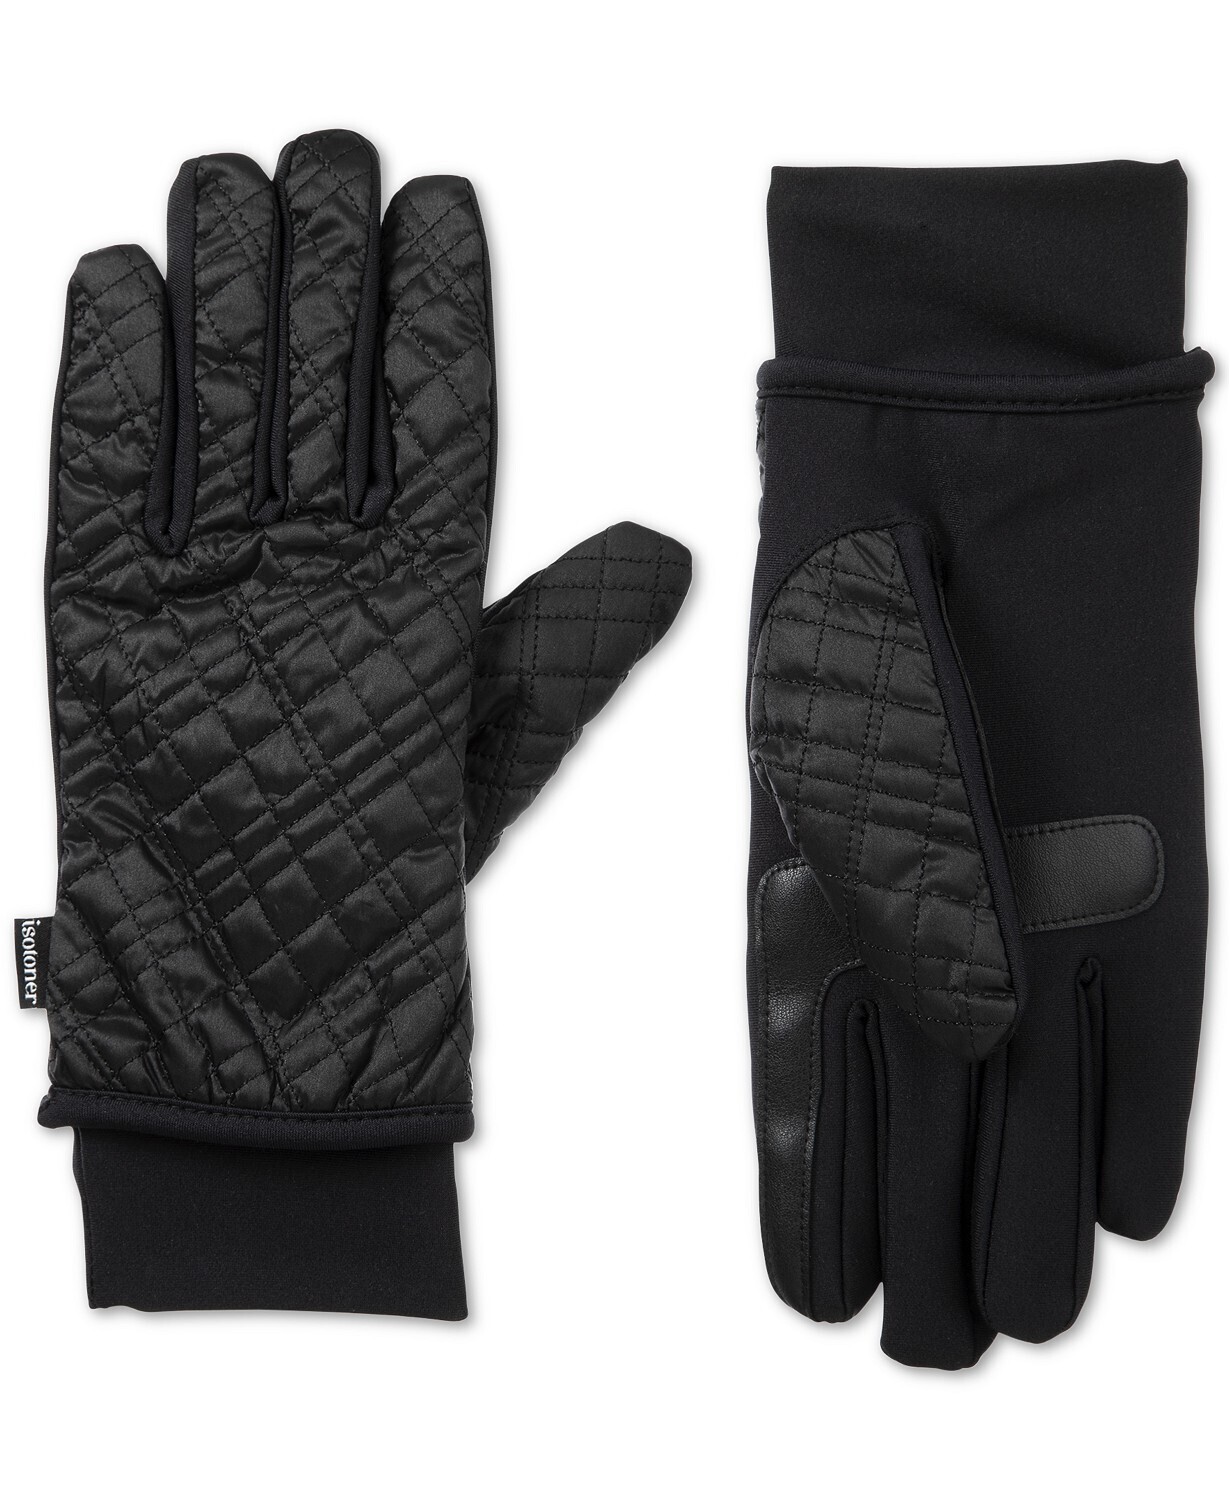 Isotoner Signature Women's SleekHeat Quilted Gloves with SmarTouch Technology